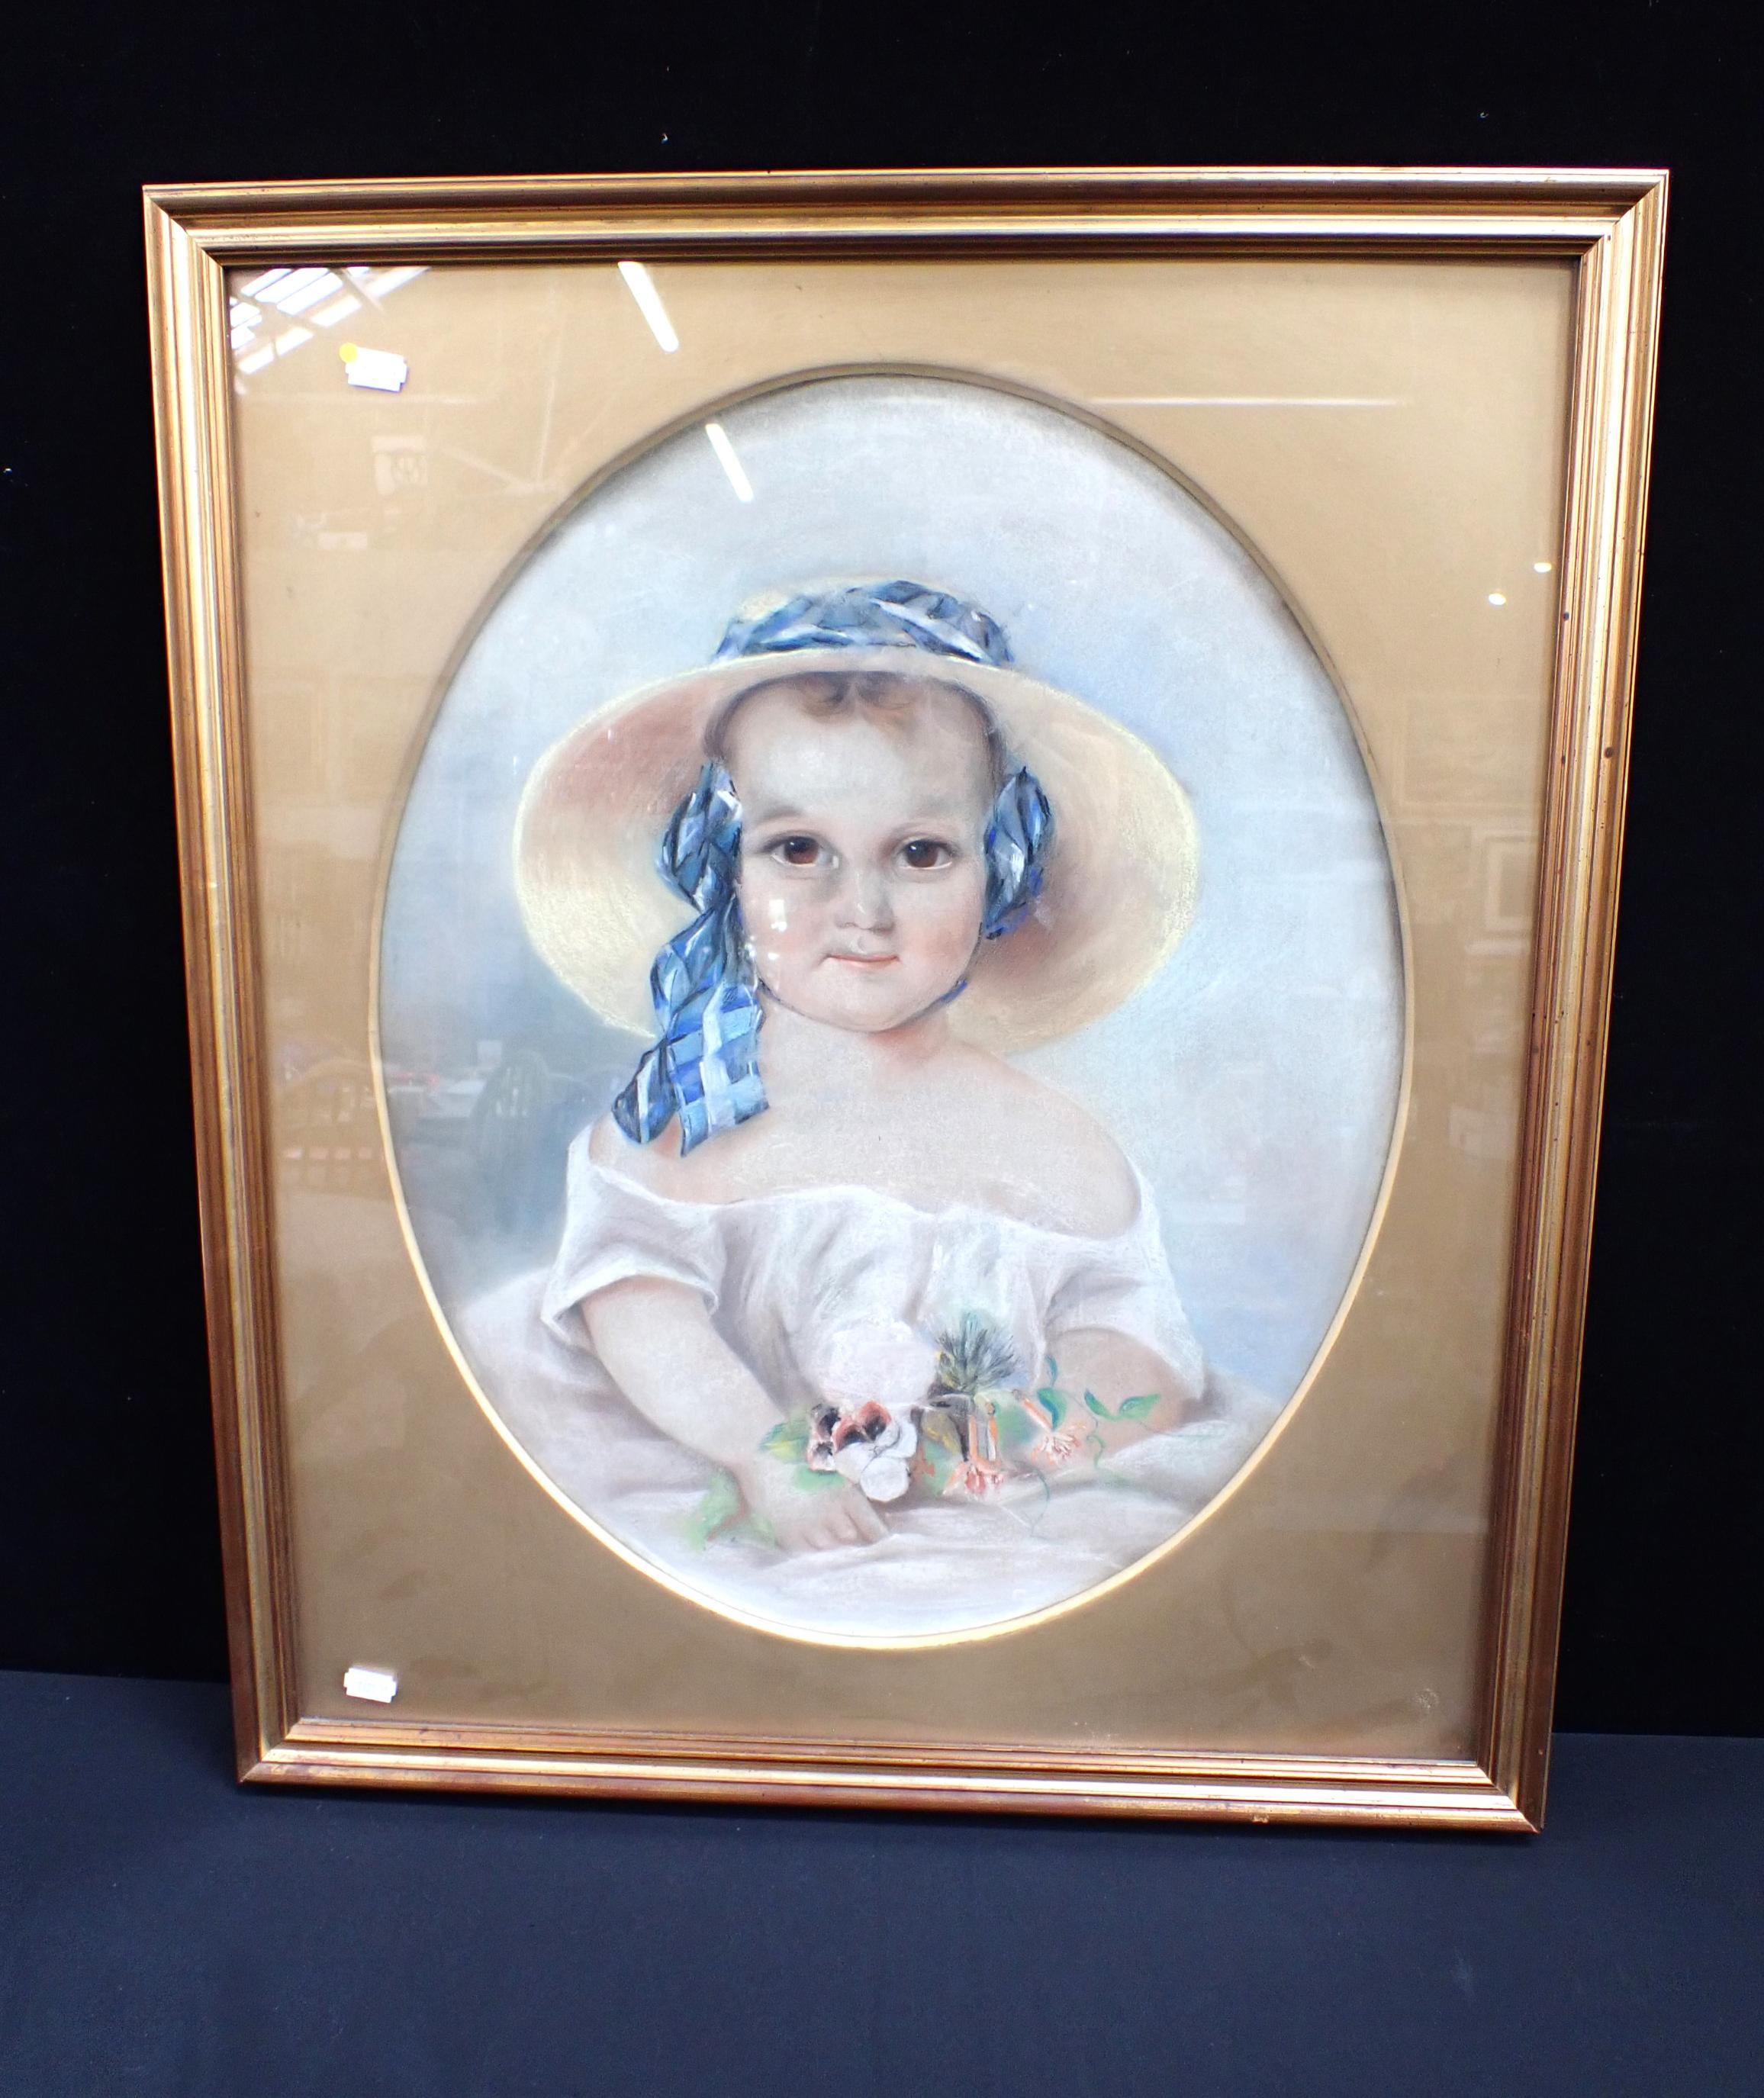 A LATE 19TH CENTURY PORTRAIT OF A CHILD, IN A BROAD STRAW HAT